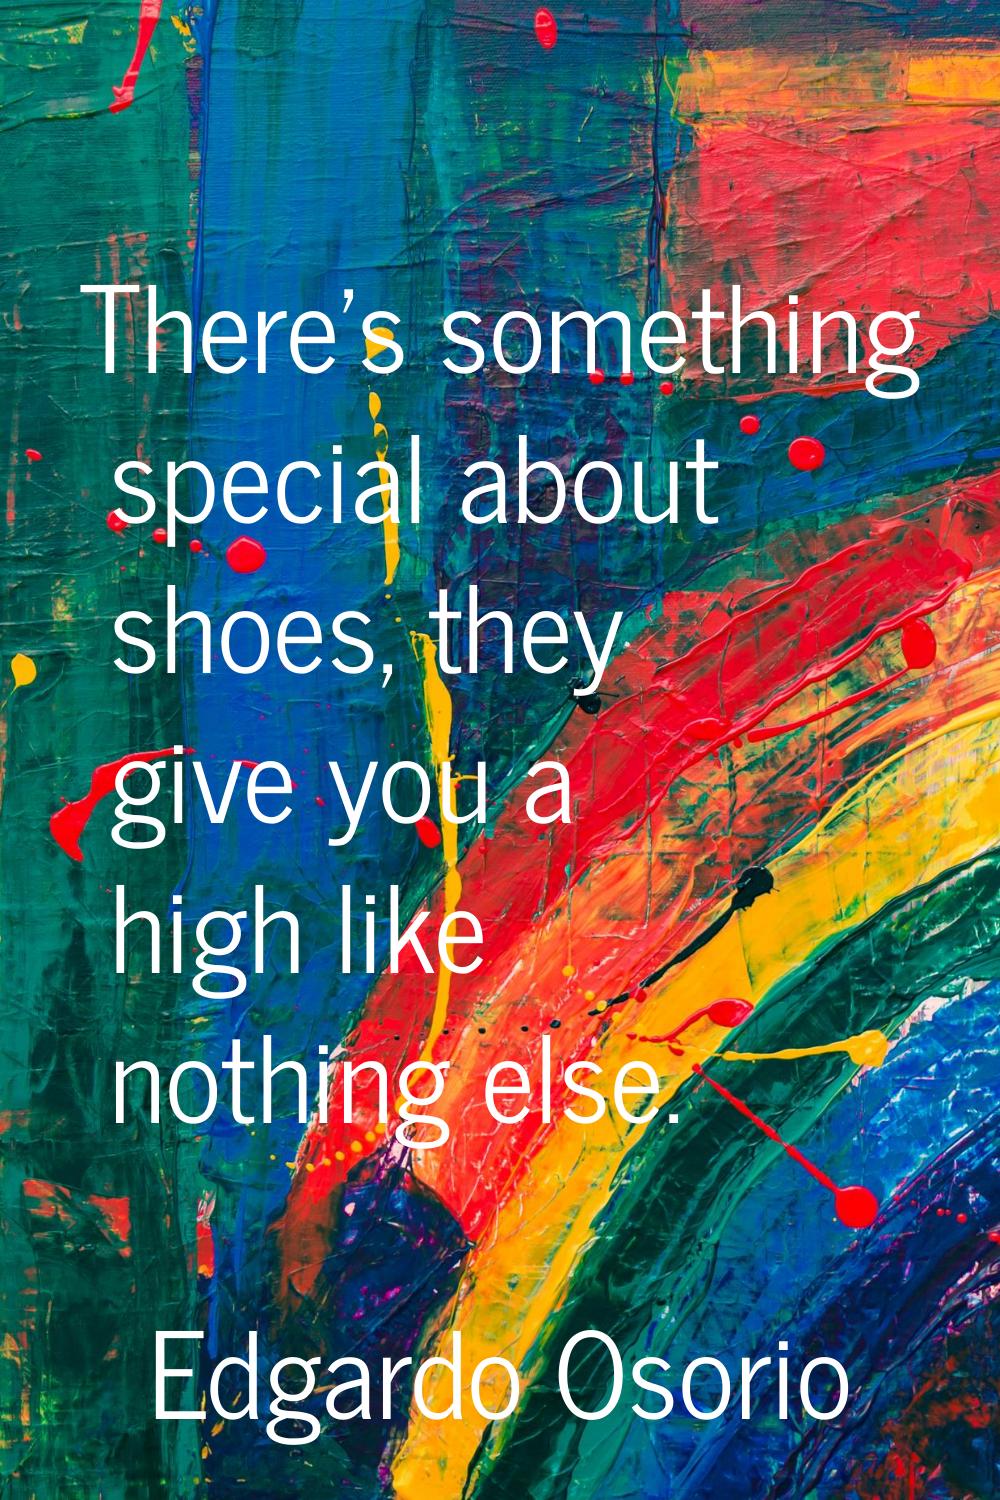 There's something special about shoes, they give you a high like nothing else.